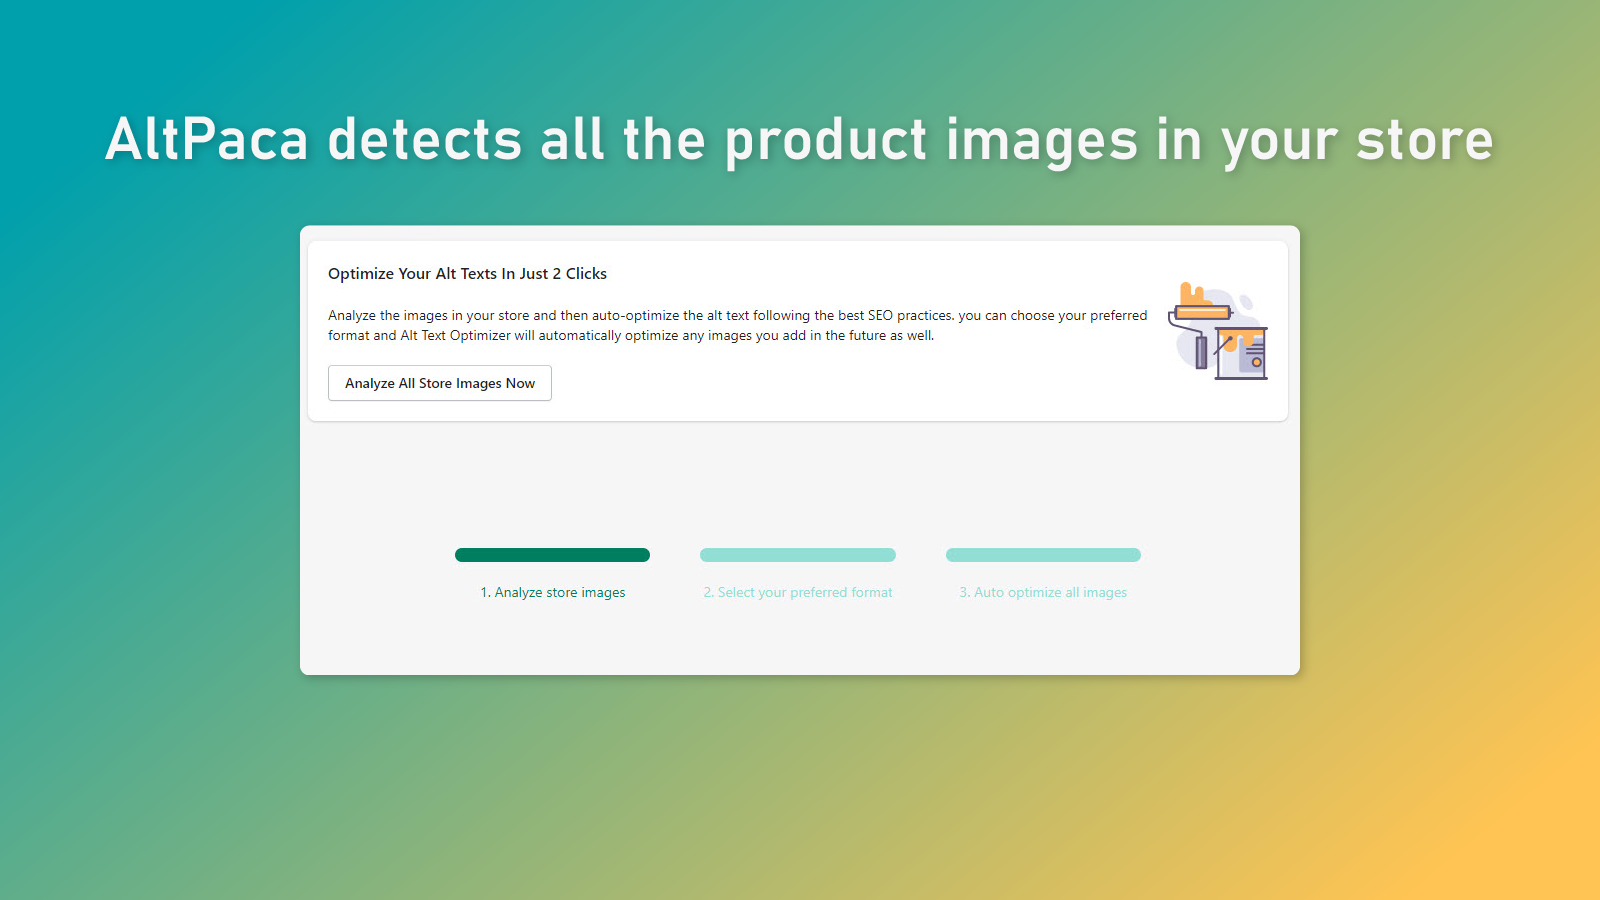 AltPaca detects all the product images in your store